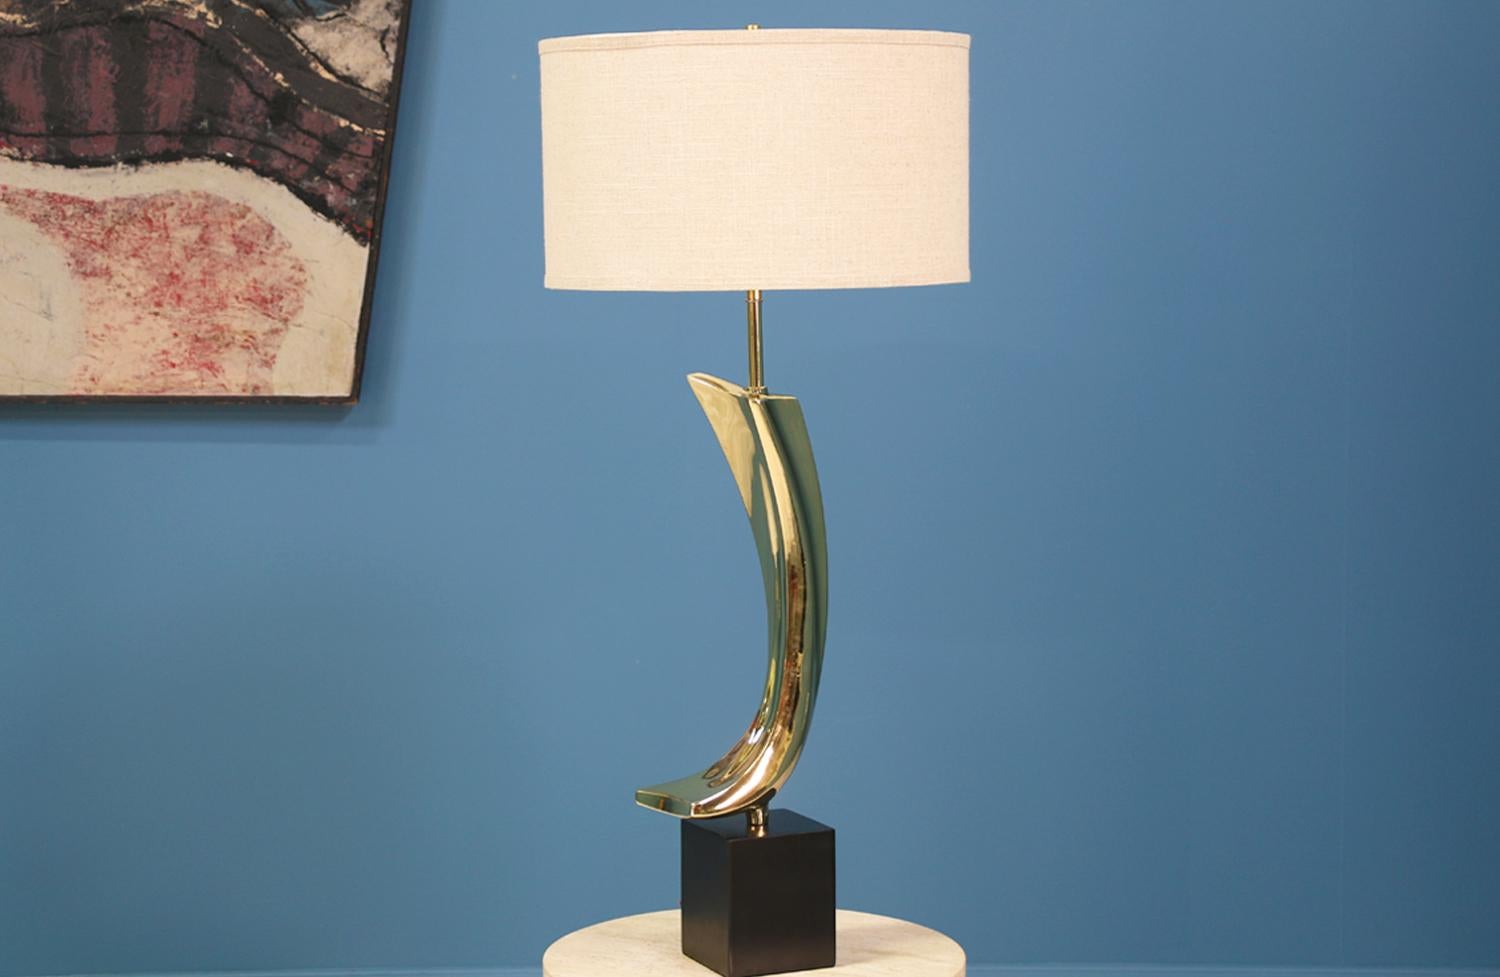 Table lamp designed by Maurizio Tempestini and manufactured in the United States by Laurel Light Co. in the 1960's. This unique lamp features a swooping sculptural brass body that has been polished and sits on a rectangular black lacquered base.